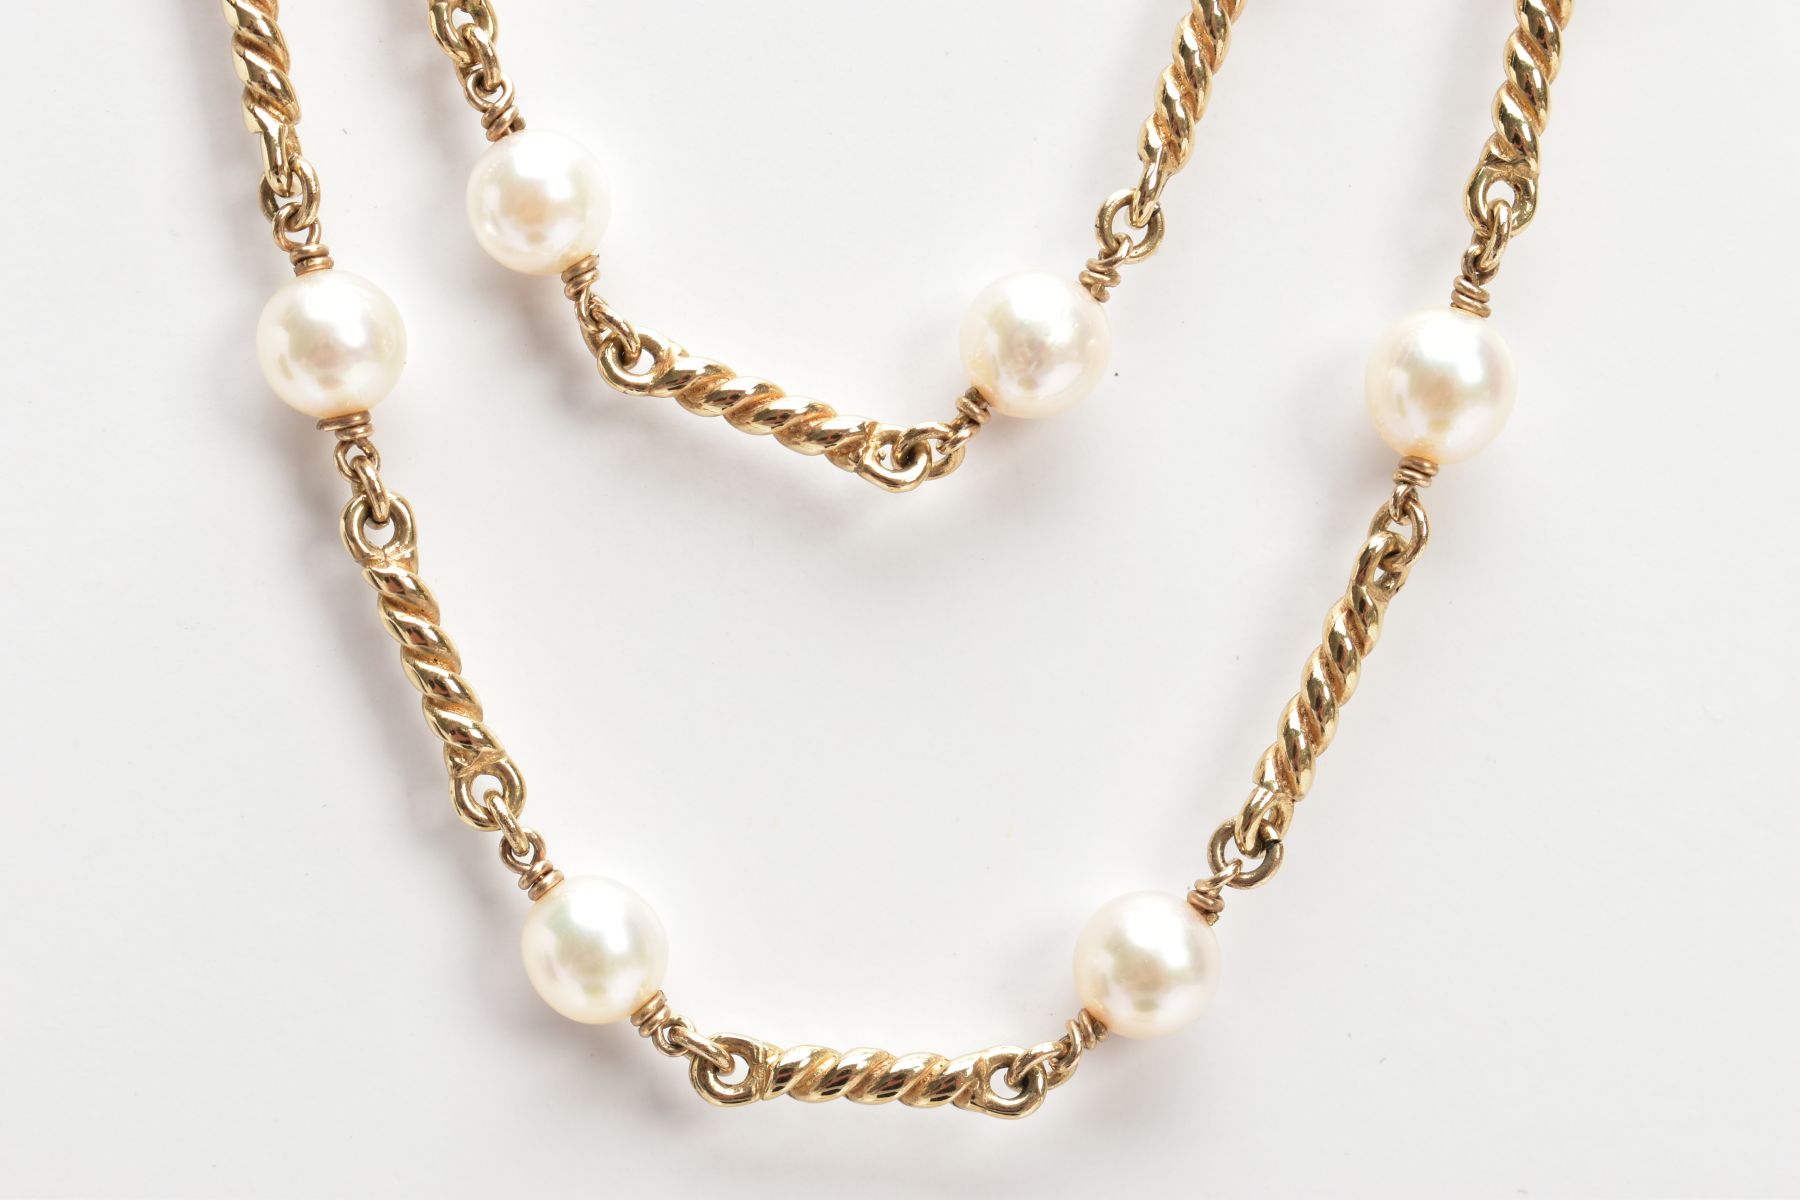 A 9CT GOLD CULTURED PEARL NECKLACE, twenty three white cultured pearls, each pearl approximately - Image 6 of 6